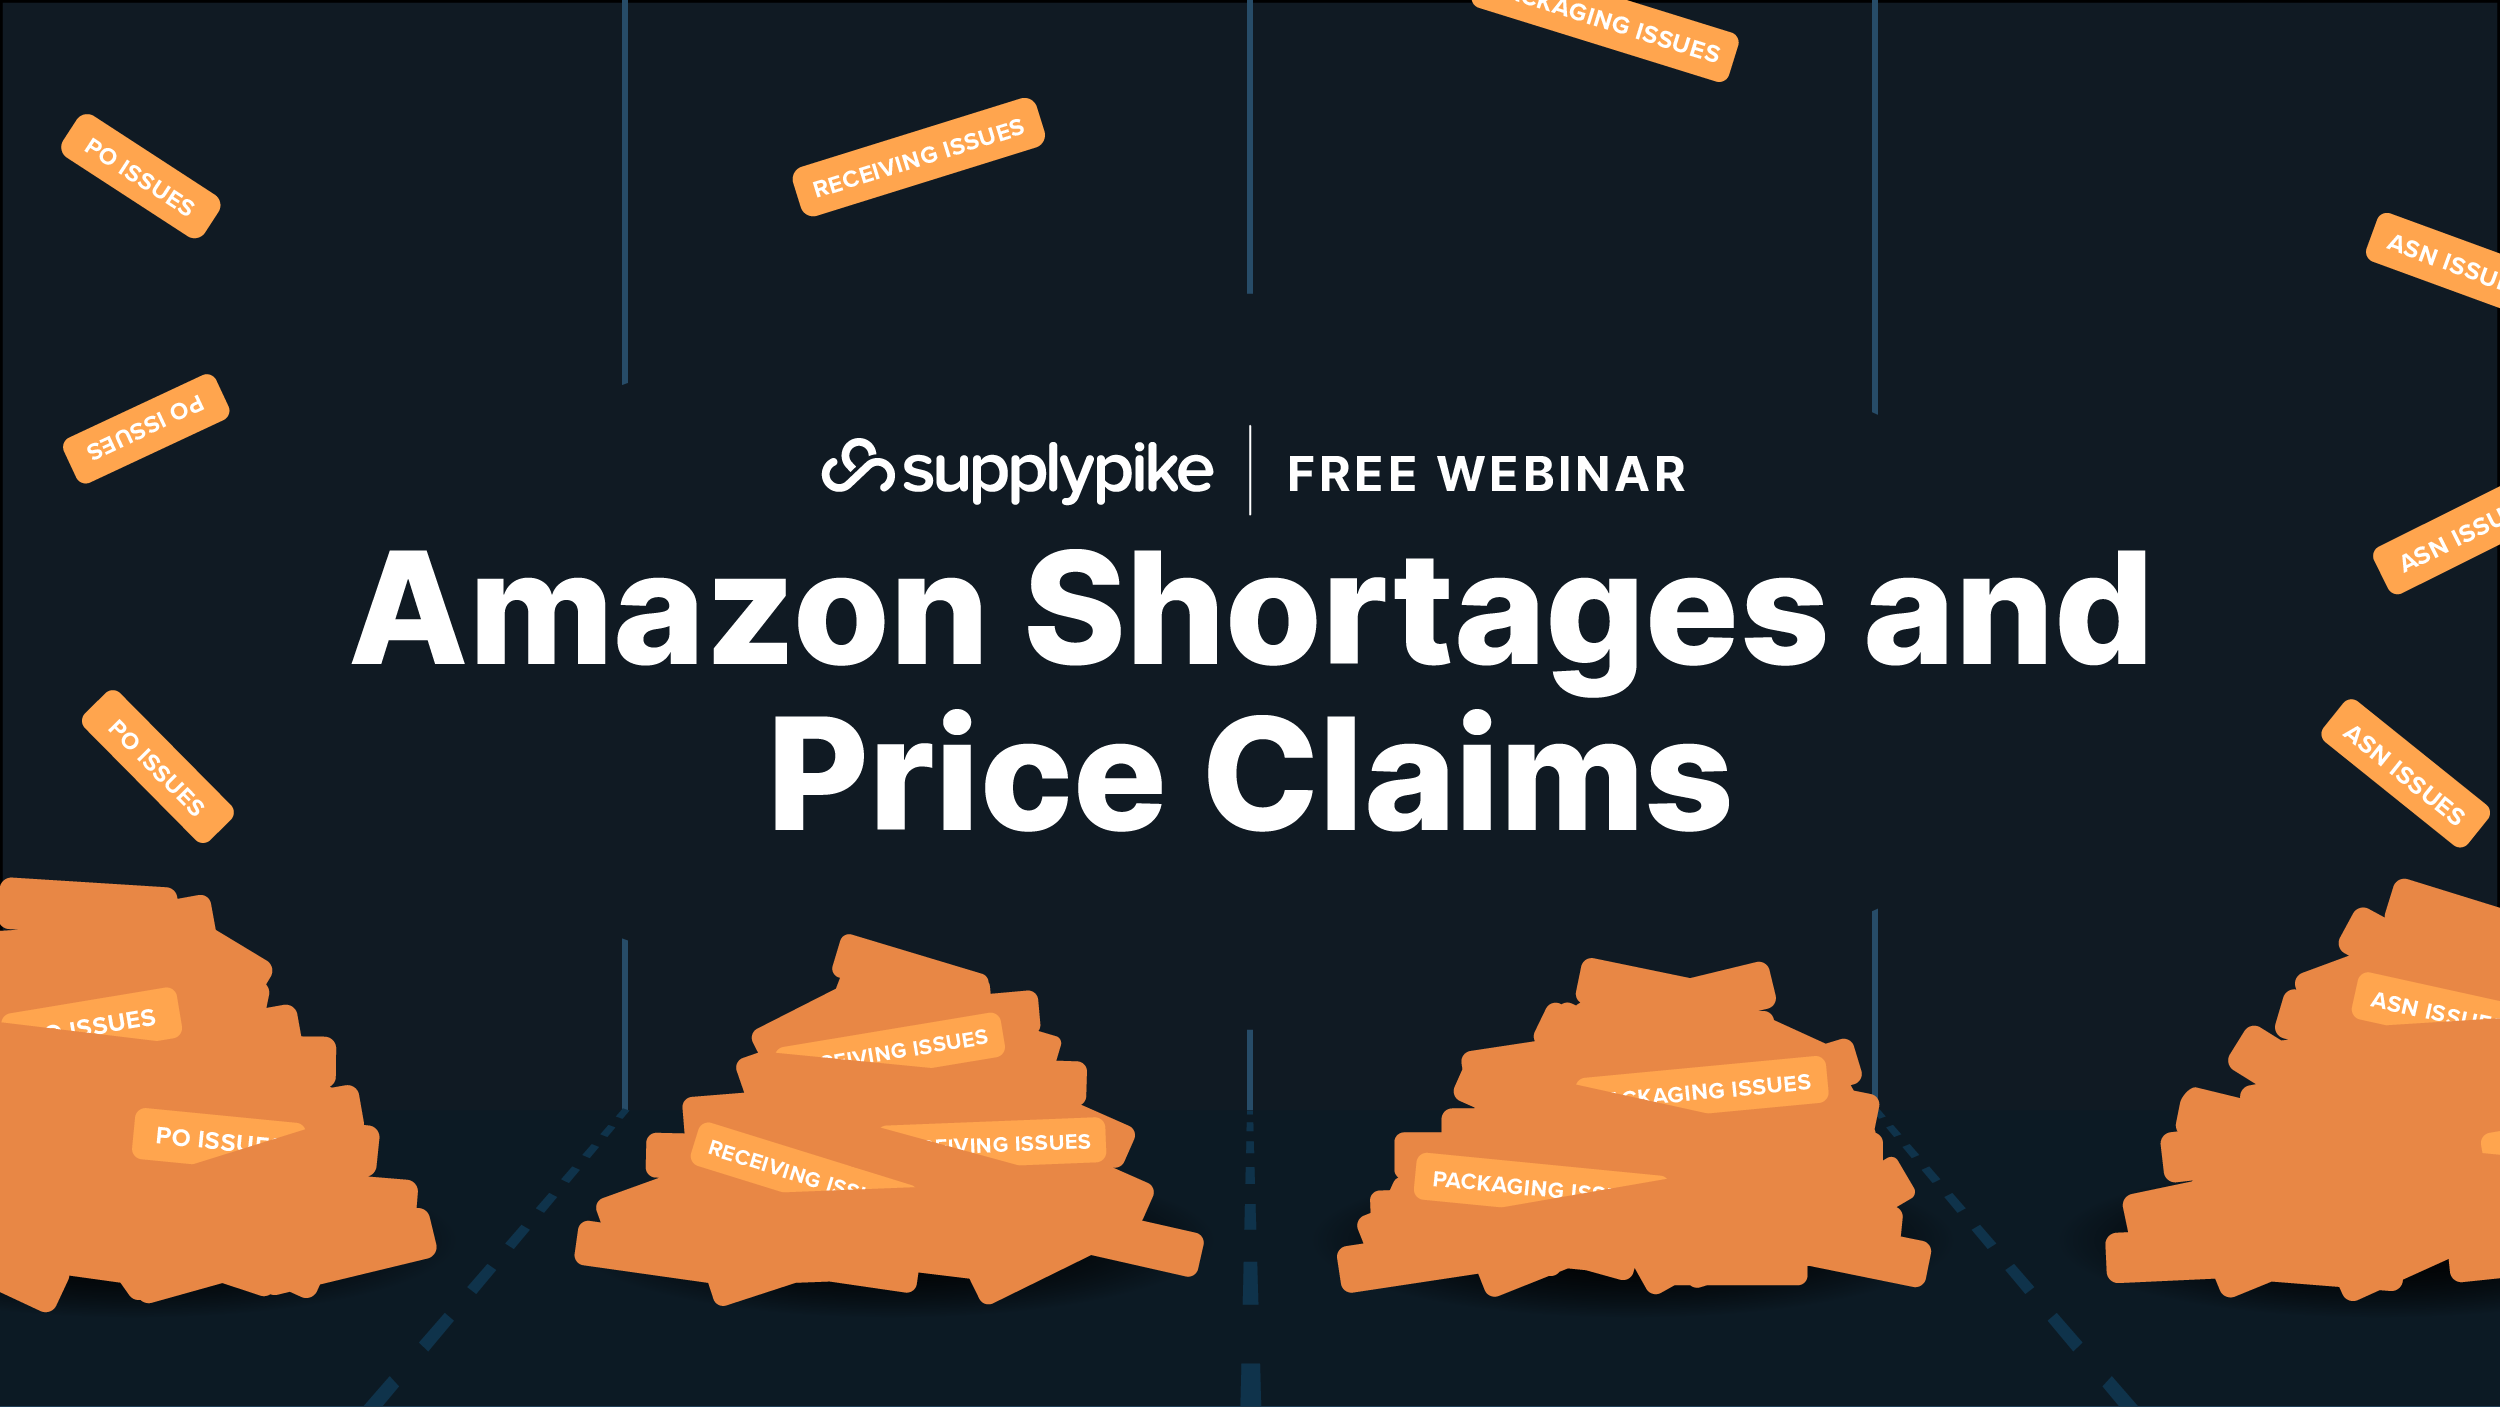 Amazon Shortages and Price Claims